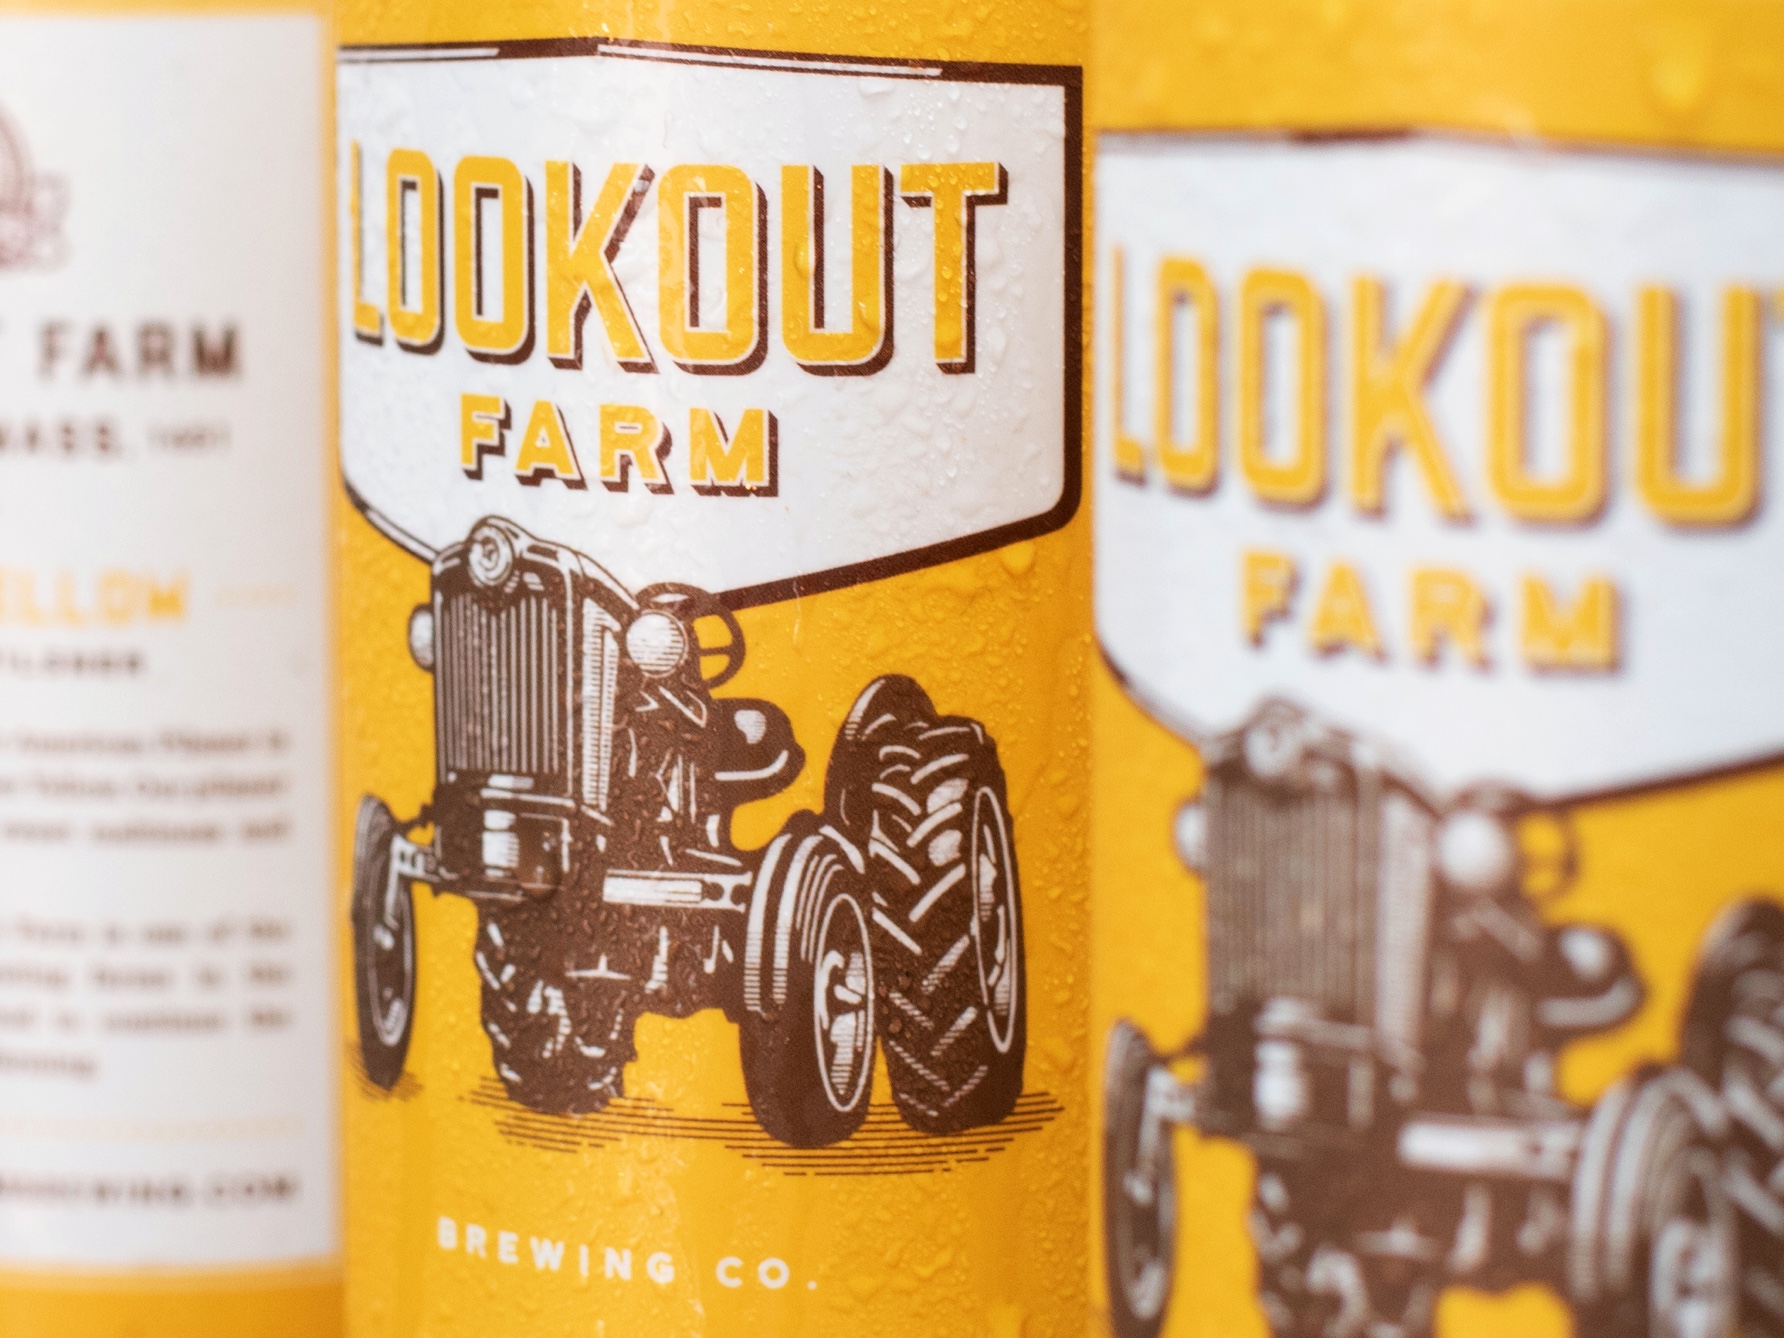 Lookout Farm Beer & Cider Co.